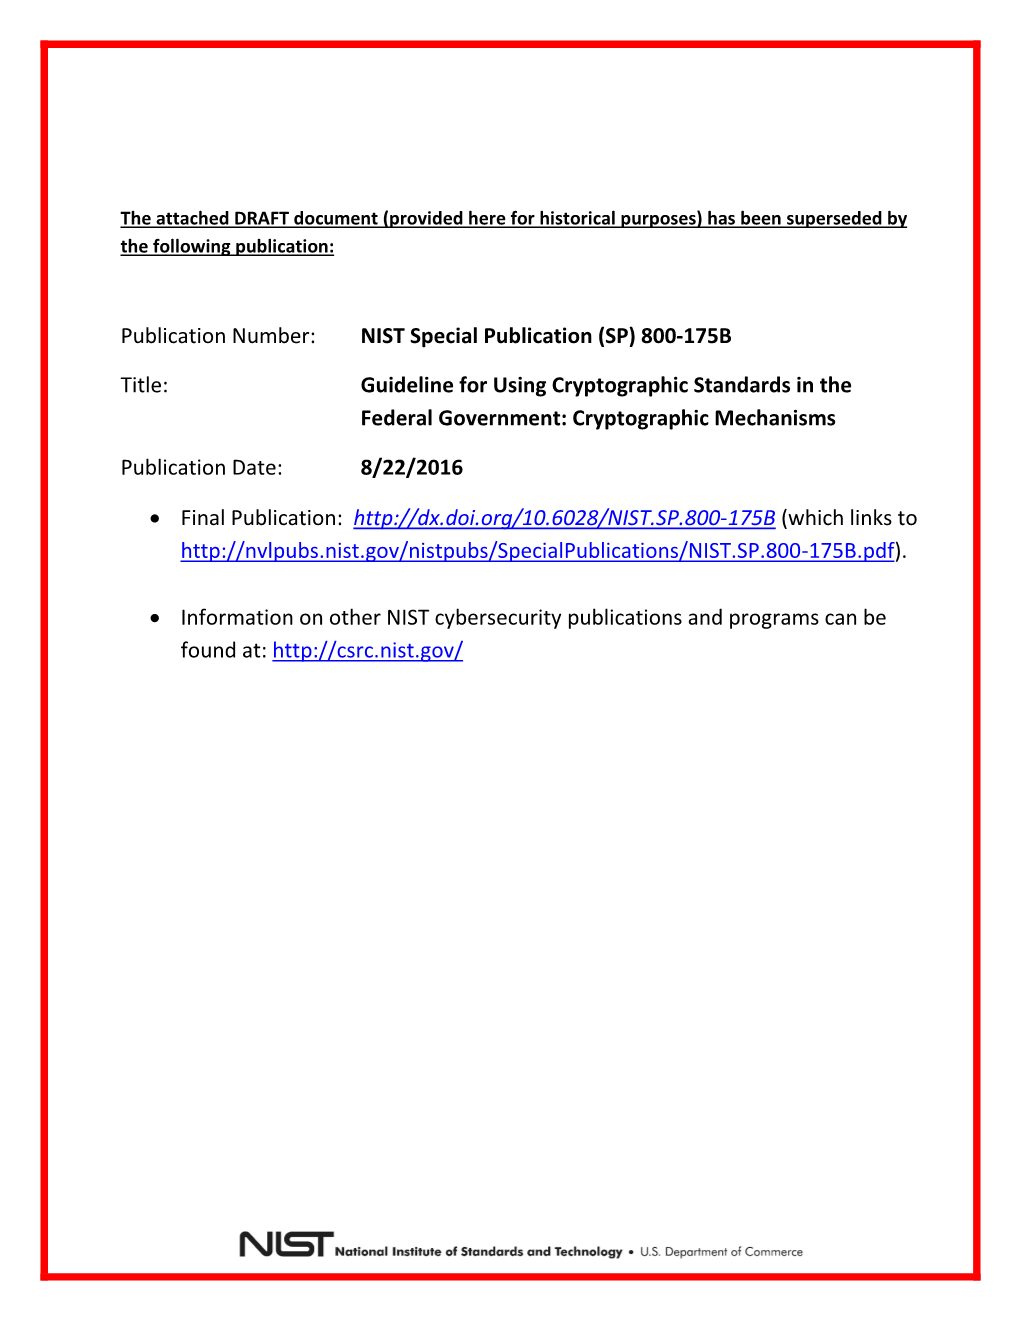 NIST SP 800-175B (DRAFT) Guideline for Using Crypto Standards: Cryptographic Mechanisms